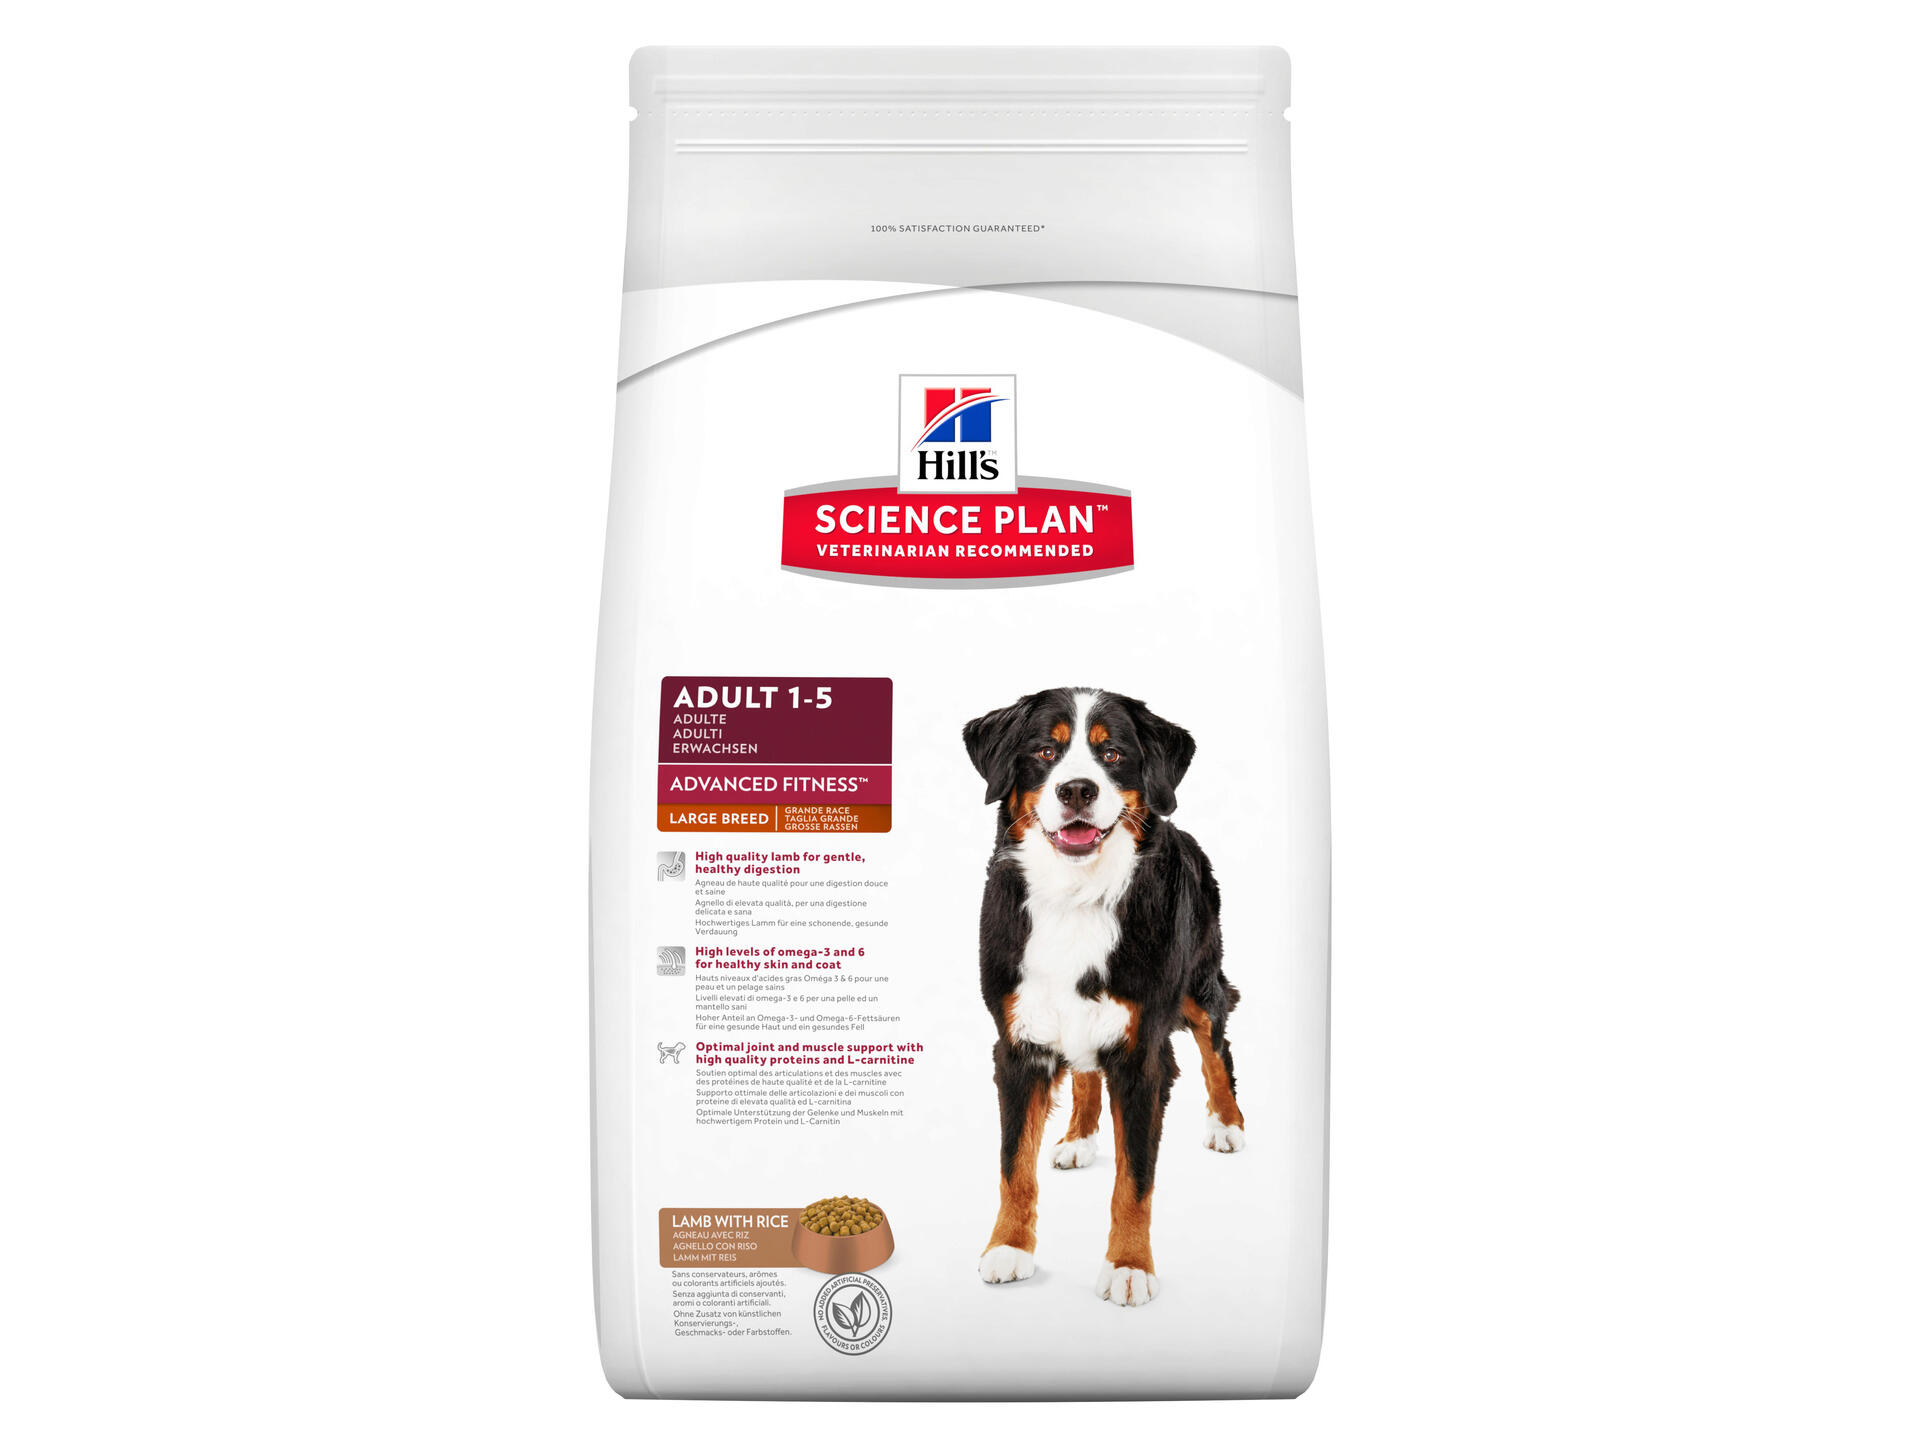 Hill's Adult Advanced Fitness Large Breed hondenvoer lamb & rice 12kg